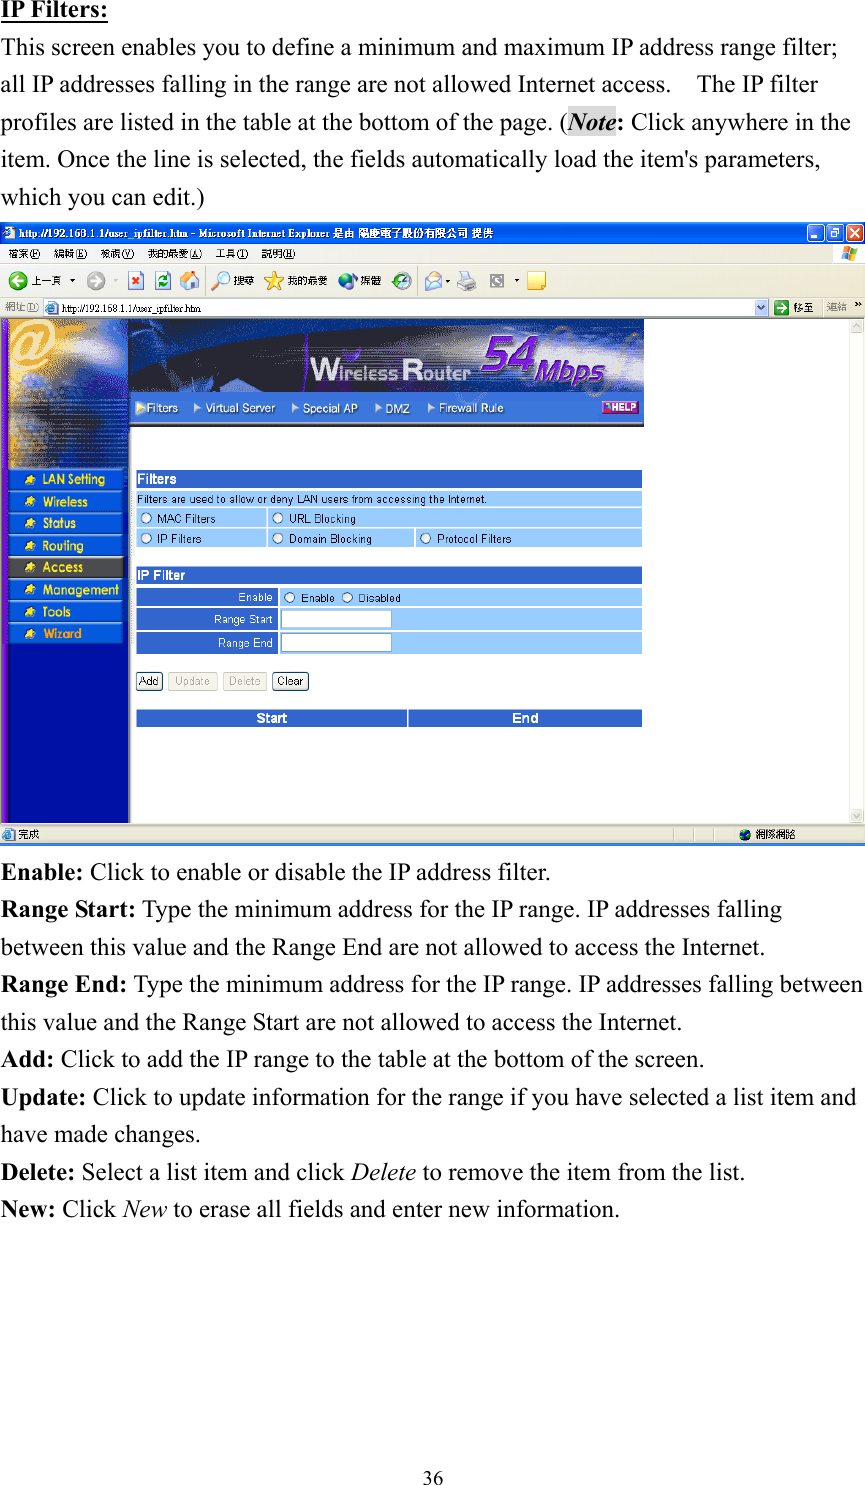 IP Filters: This screen enables you to define a minimum and maximum IP address range filter; all IP addresses falling in the range are not allowed Internet access.    The IP filter profiles are listed in the table at the bottom of the page. (Note: Click anywhere in the item. Once the line is selected, the fields automatically load the item&apos;s parameters, which you can edit.)  Enable: Click to enable or disable the IP address filter. Range Start: Type the minimum address for the IP range. IP addresses falling between this value and the Range End are not allowed to access the Internet. Range End: Type the minimum address for the IP range. IP addresses falling between this value and the Range Start are not allowed to access the Internet. Add: Click to add the IP range to the table at the bottom of the screen. Update: Click to update information for the range if you have selected a list item and have made changes. Delete: Select a list item and click Delete to remove the item from the list. New: Click New to erase all fields and enter new information.   36